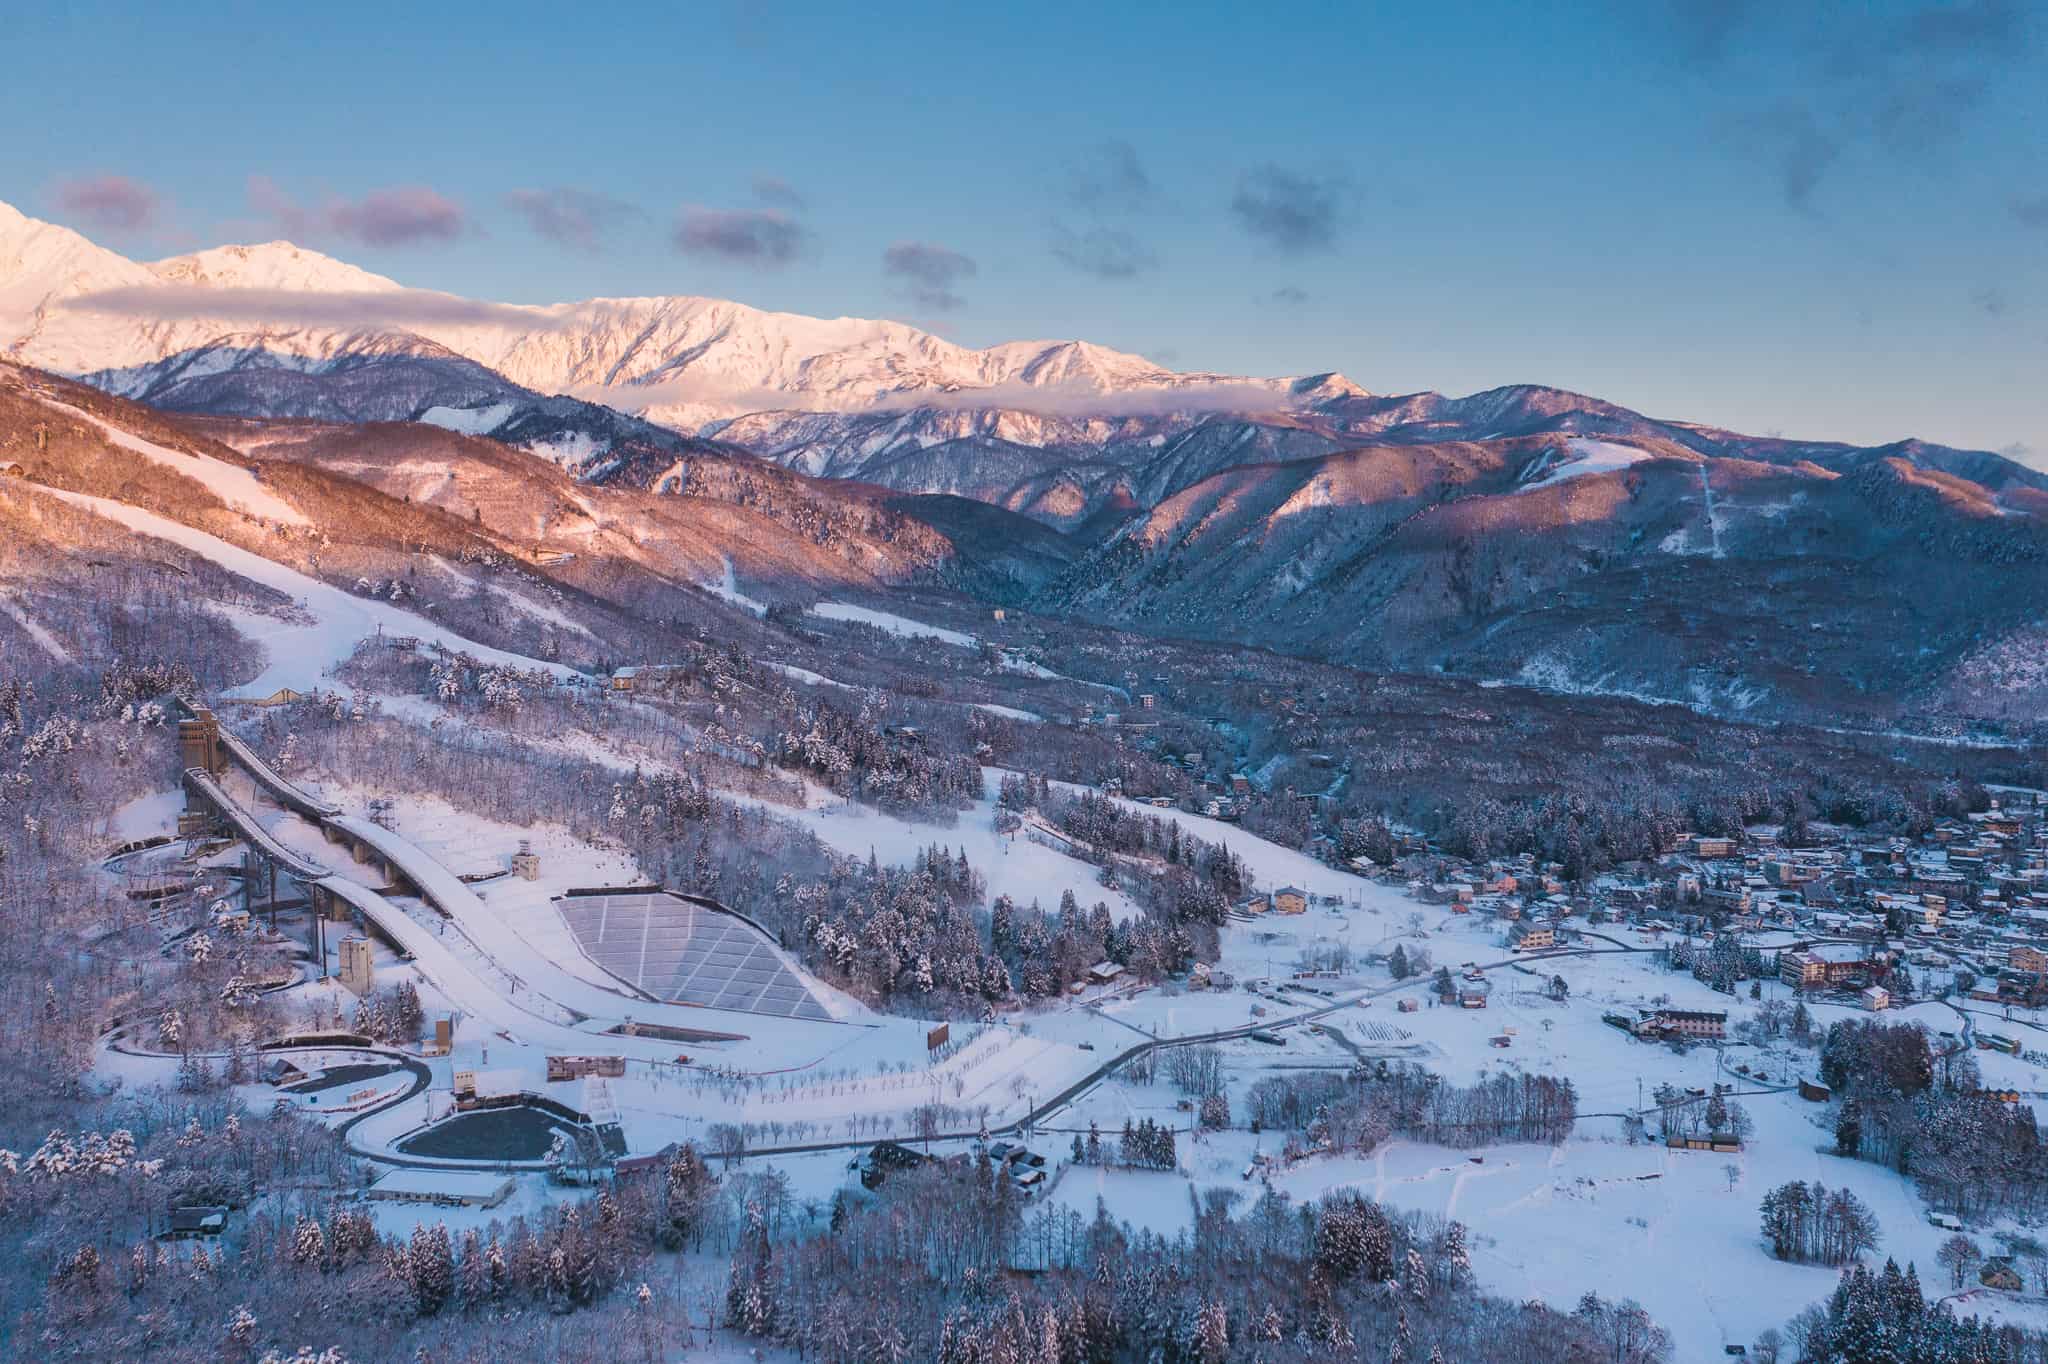 Sunrise over the mountains in Hakuba, the ski jumps built for the Nagano Olympics to the left.